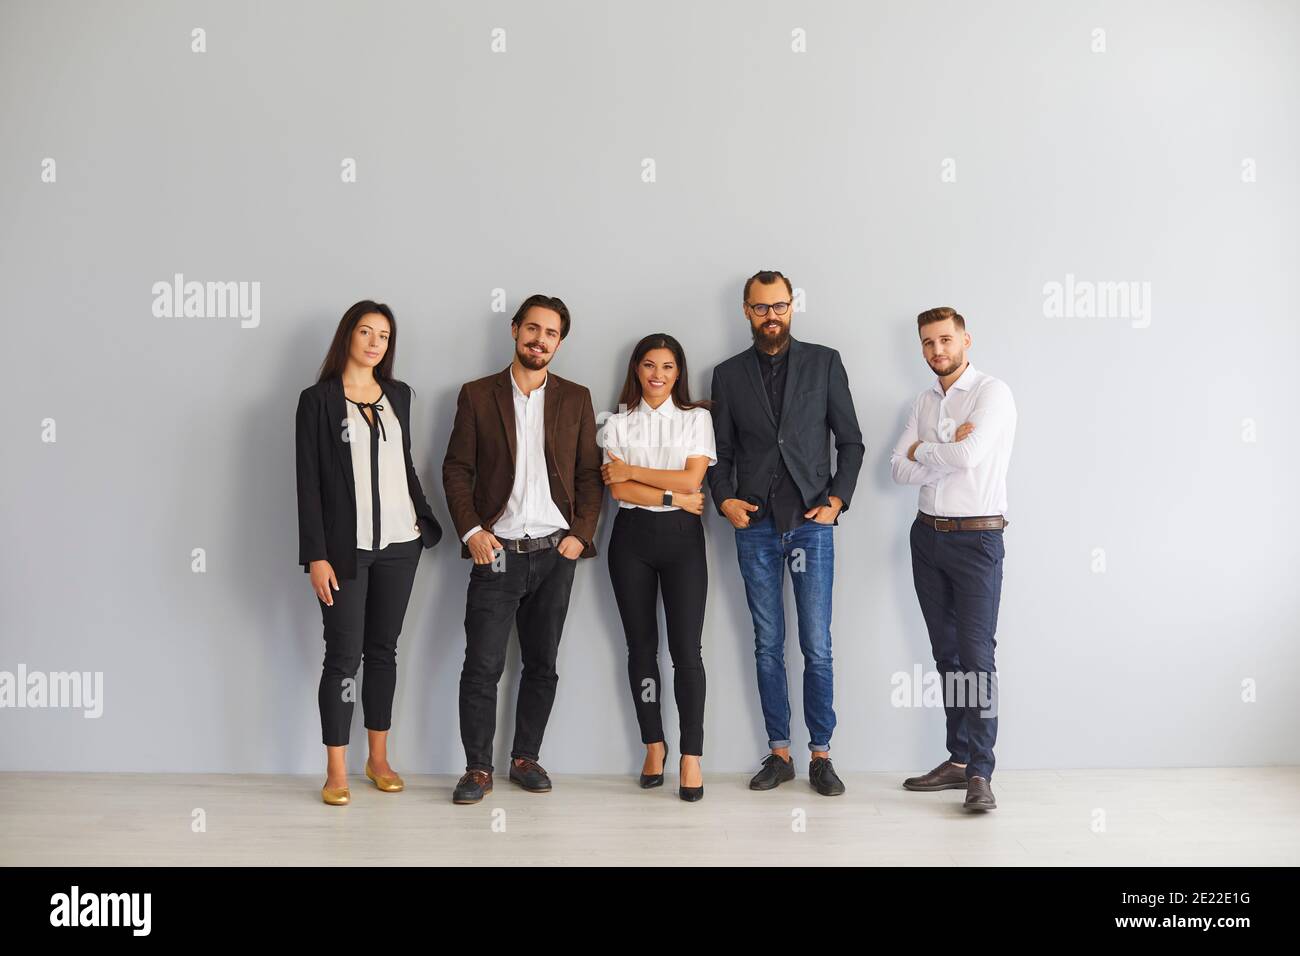 Group of smiling business people colleagues standing in office Stock Photo